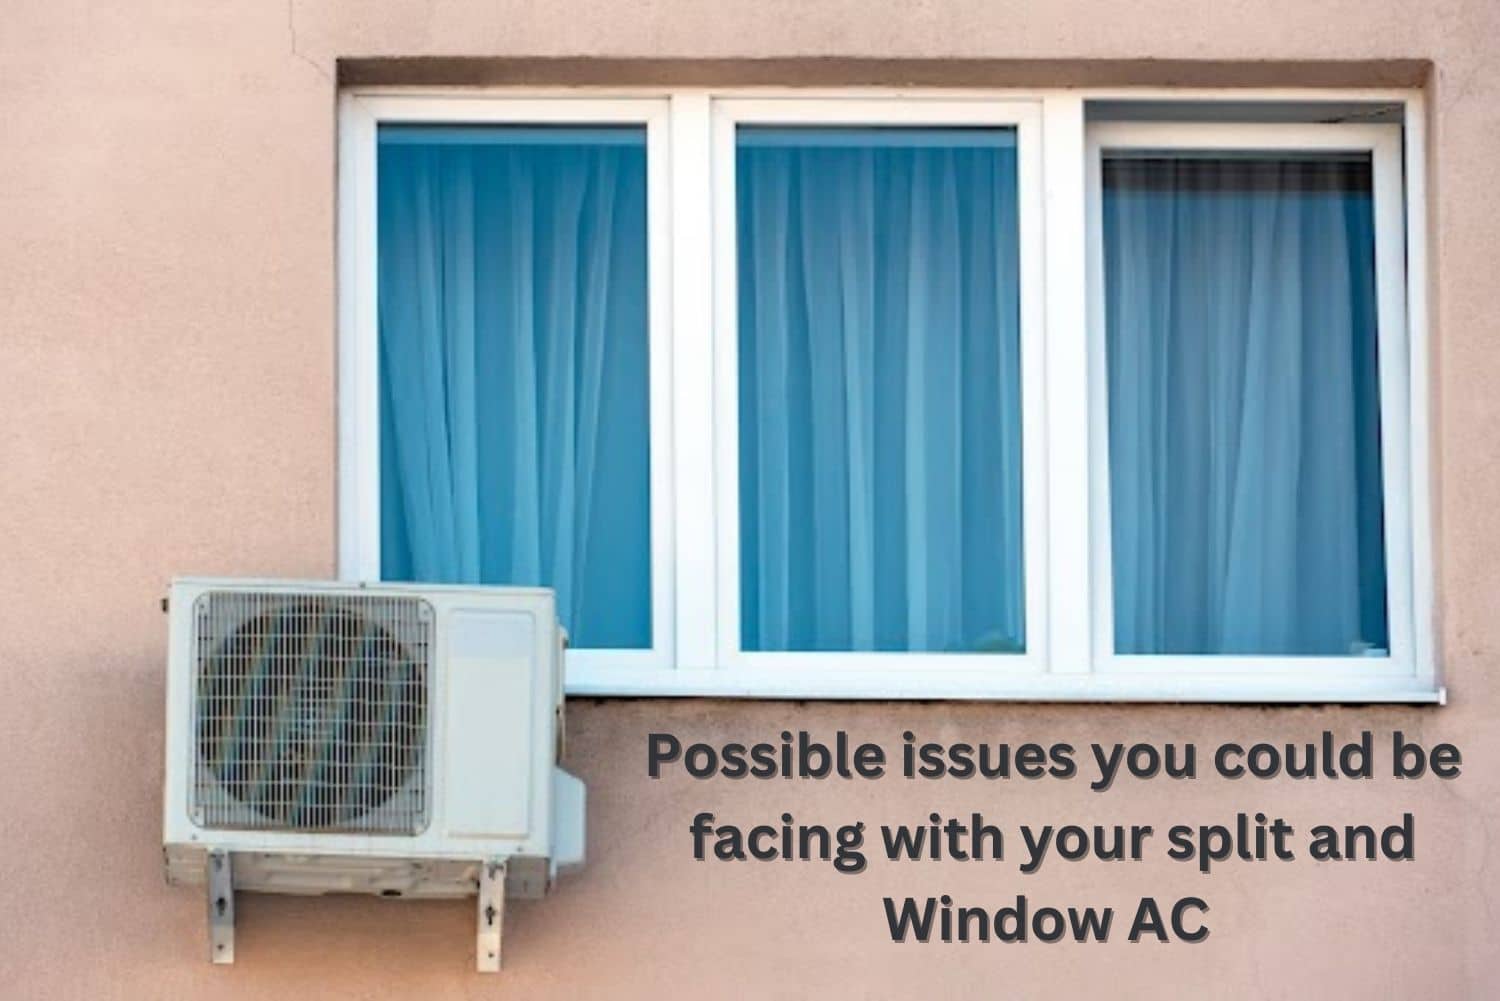 Issue facing with split & window AC